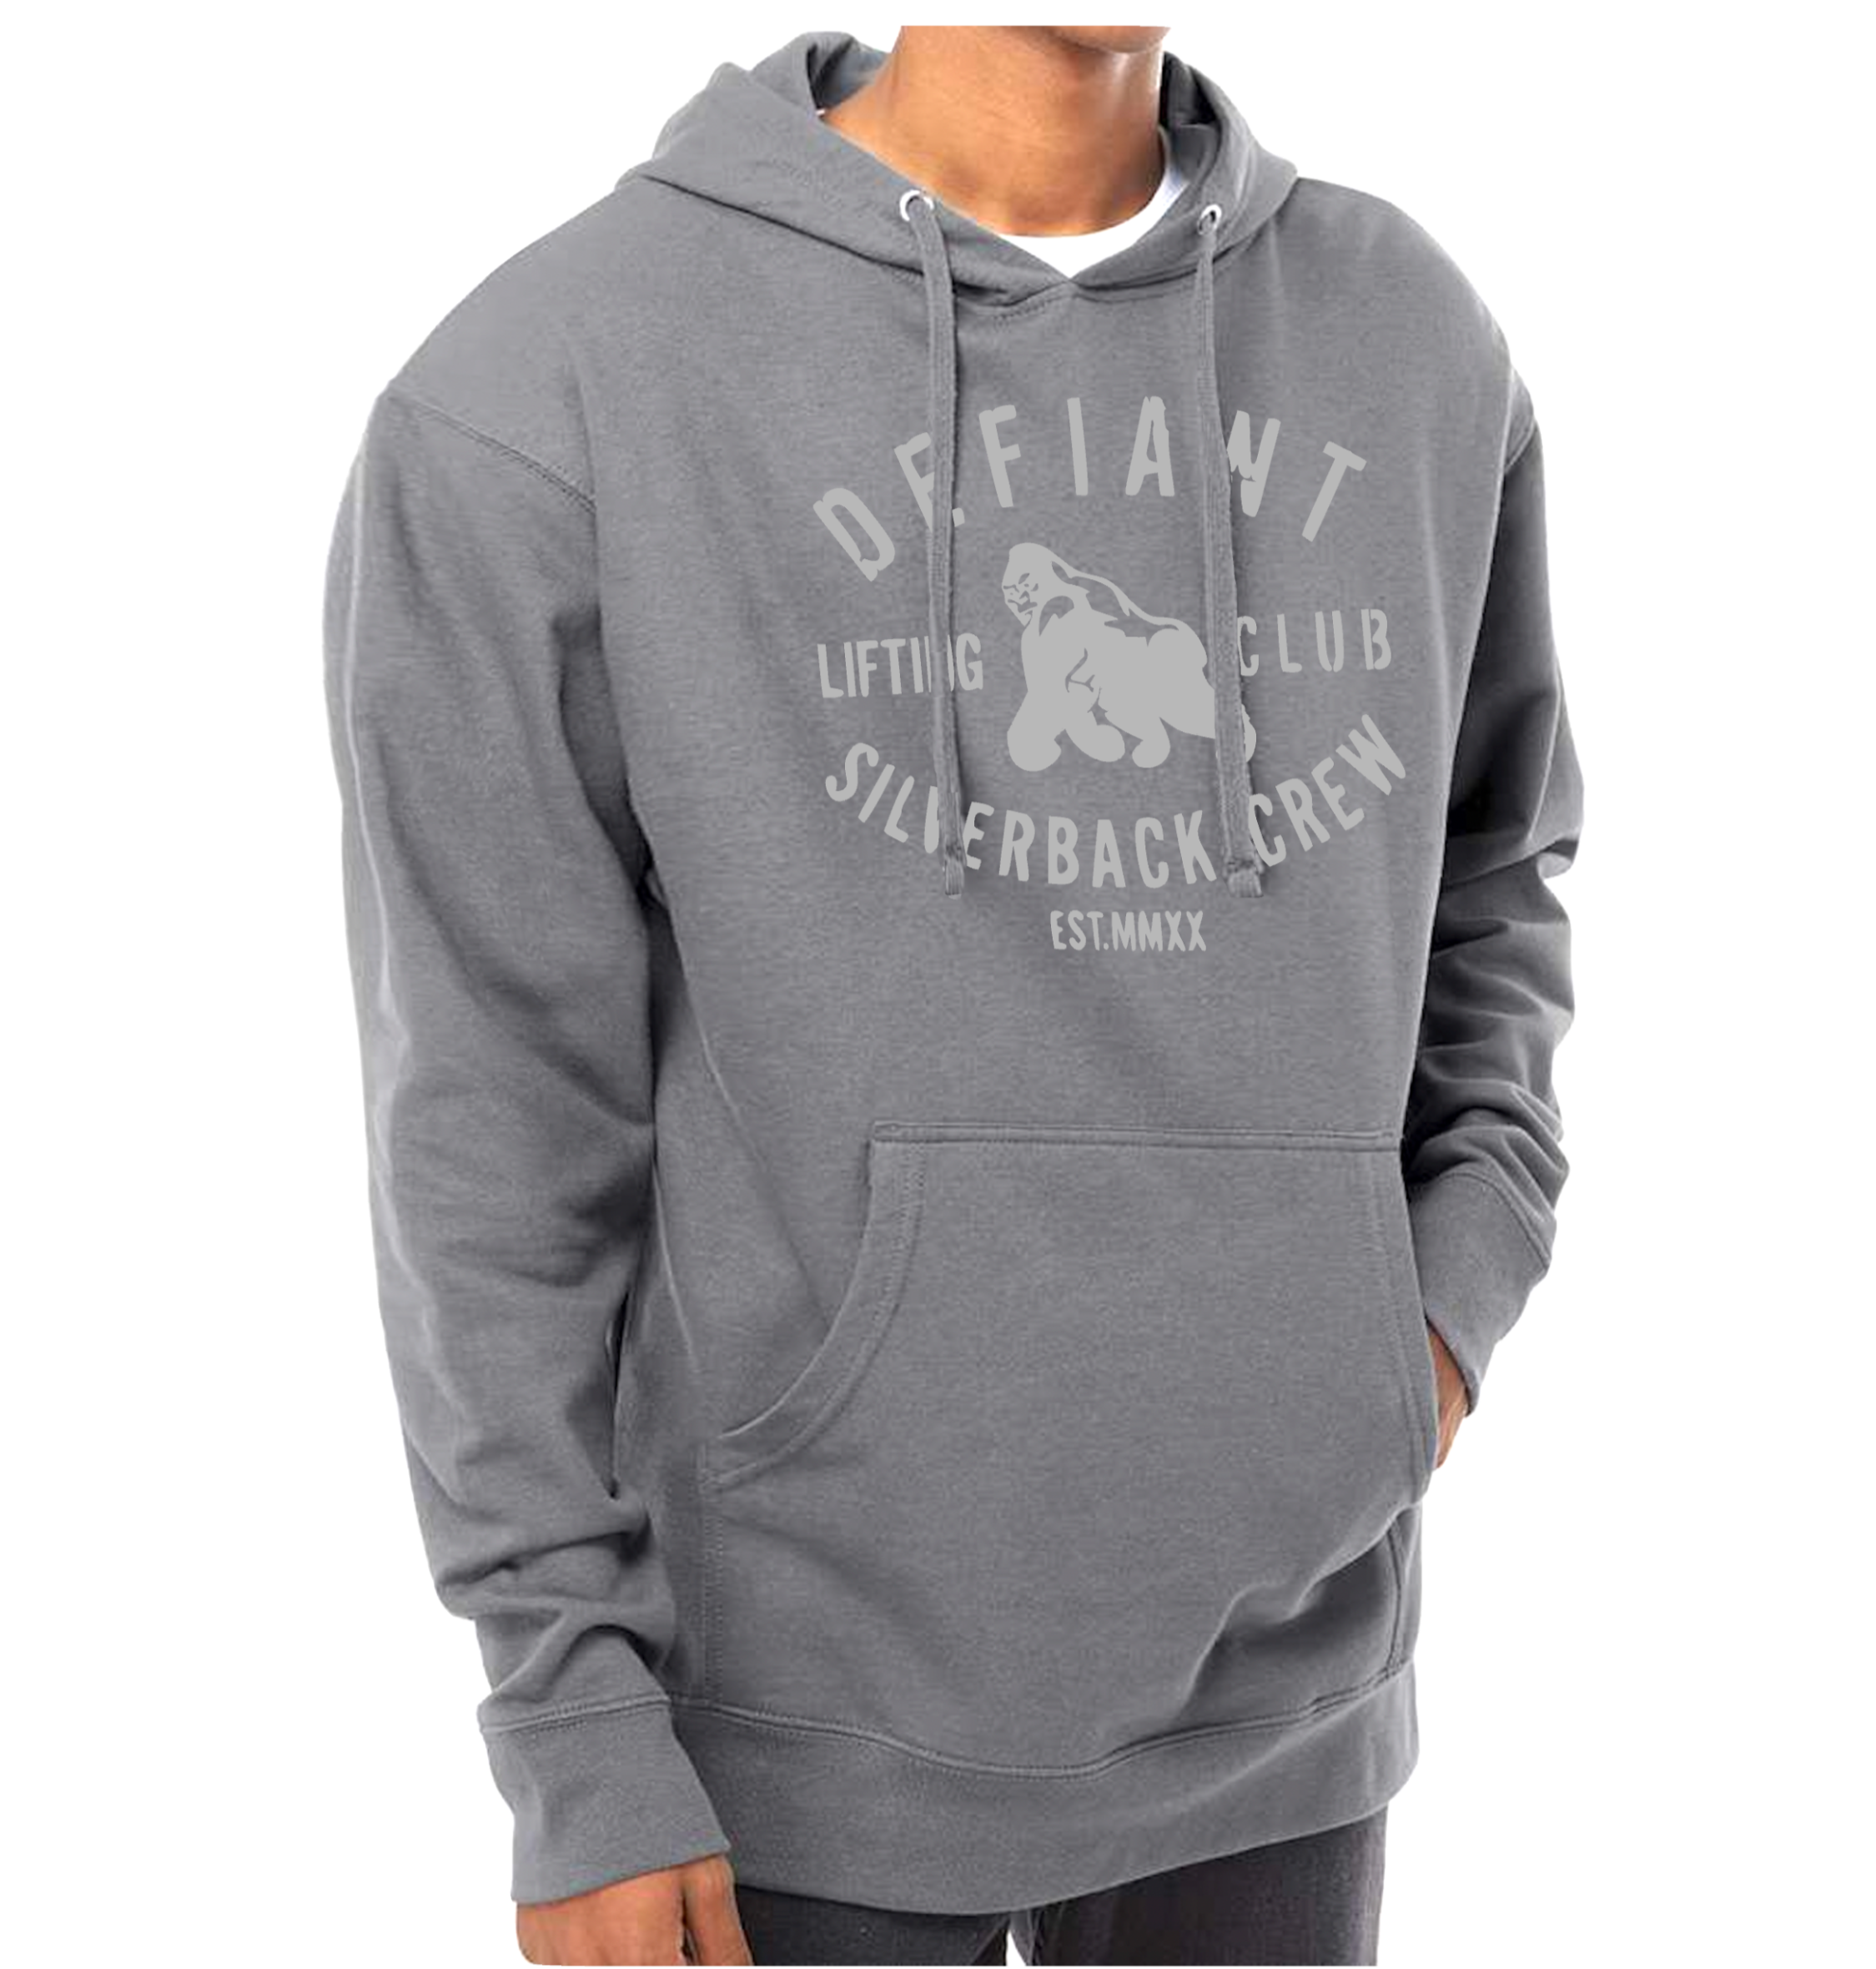 NEW COLOR - SILVER SILVERBACK HOODIE - LIMITED SIZES